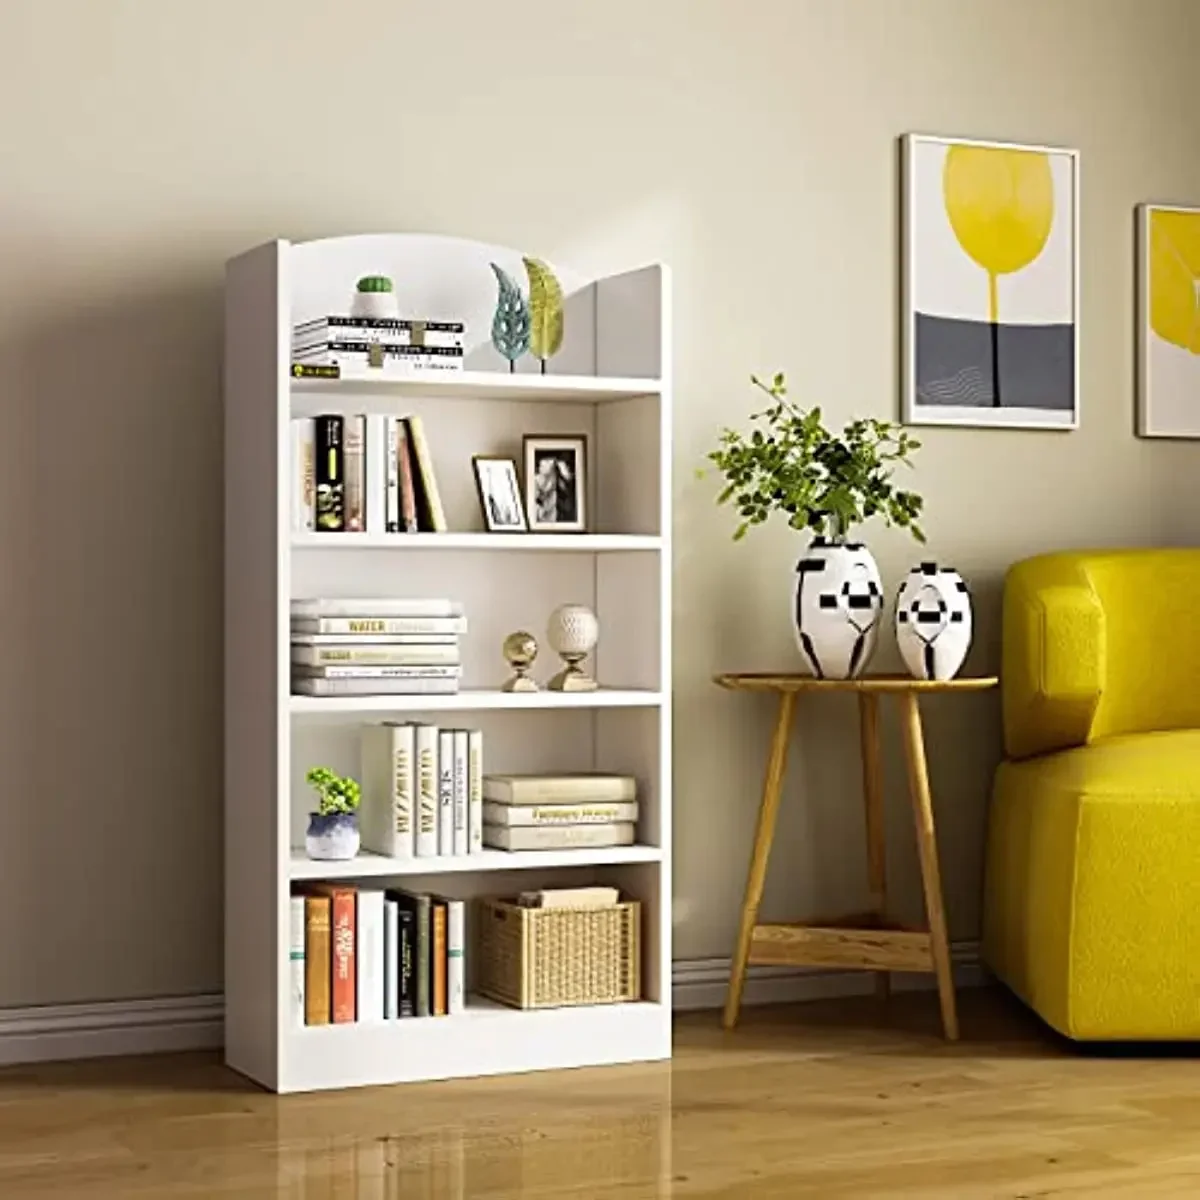 

Tall Bookcase and Bookshelf, Open Shelf Wood Bookcase with 5-Tier Storage Shelves,Bookshelves Standing Display Shelf Units